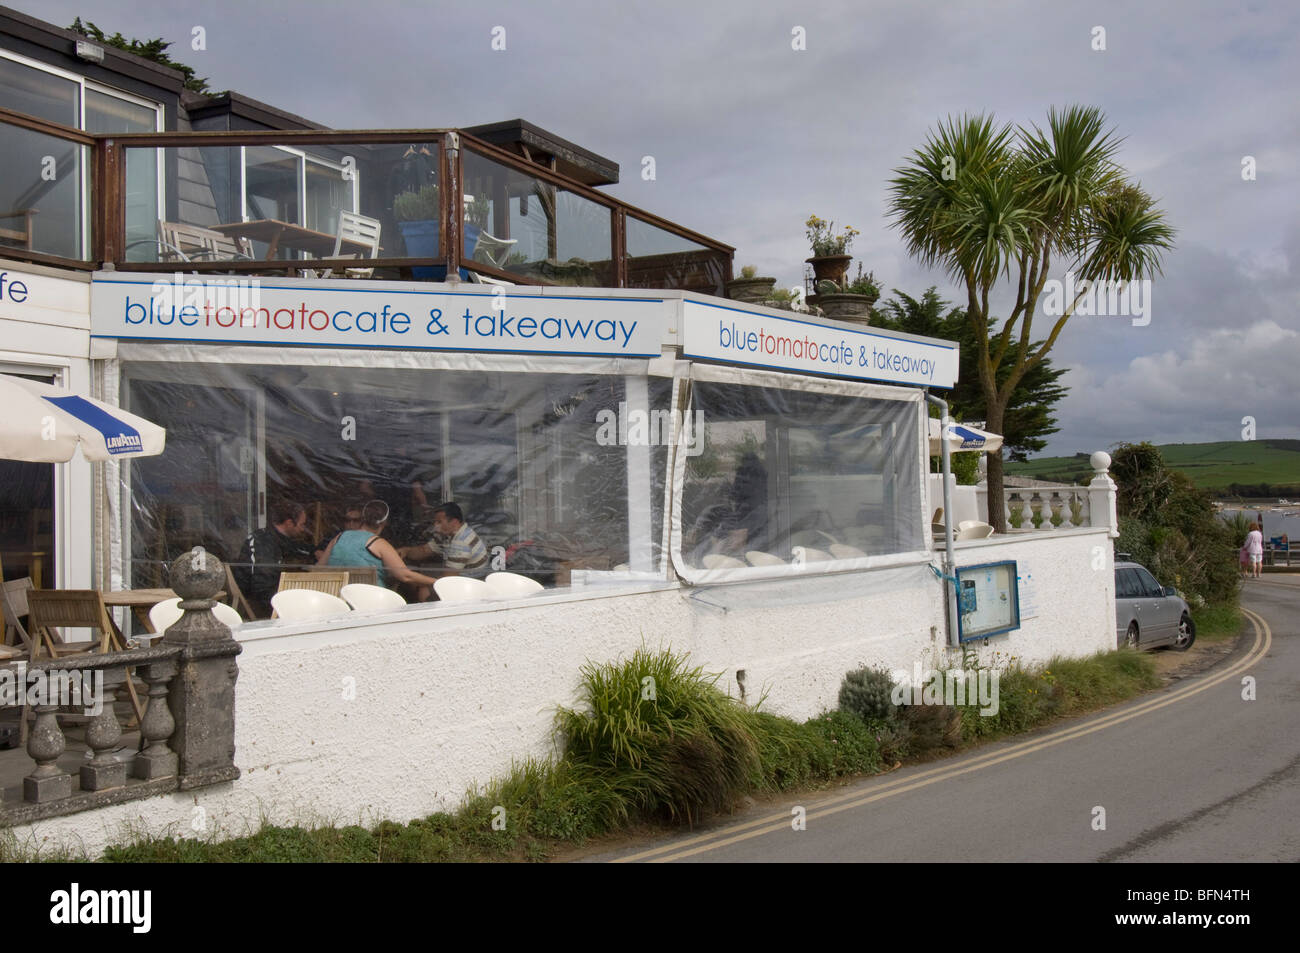 The trendy Blue Tomato Cafe on Rock seafront, on the North Cornwall coast. Stock Photo